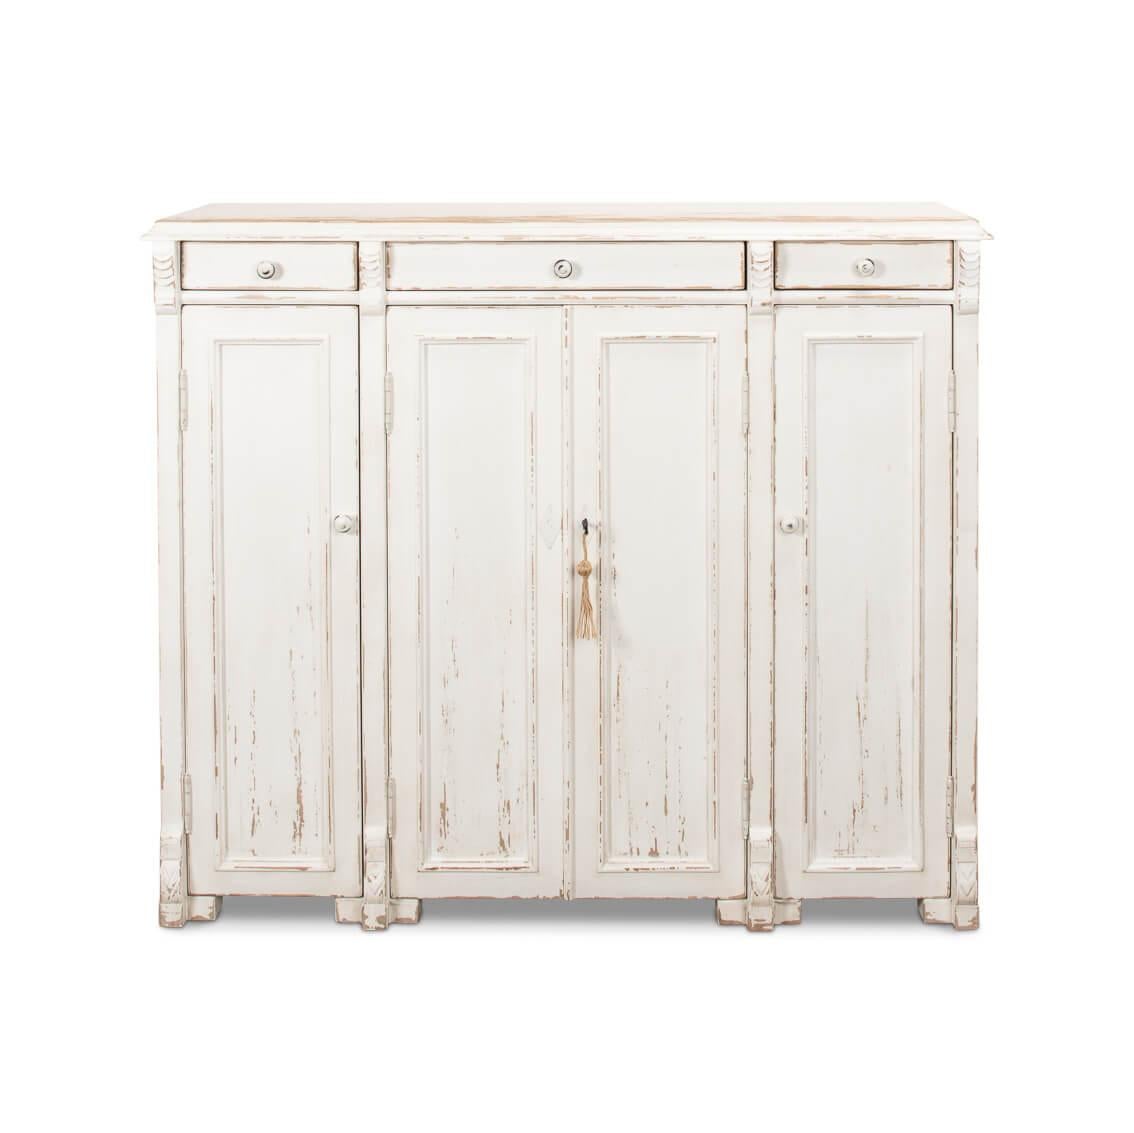 This charming piece captures the spirit of a quaint provincial cottage with its lovingly distressed whitewashed finish and classic paneling. The traditional craftsmanship is evident in the fine details, including the elegant molding and the